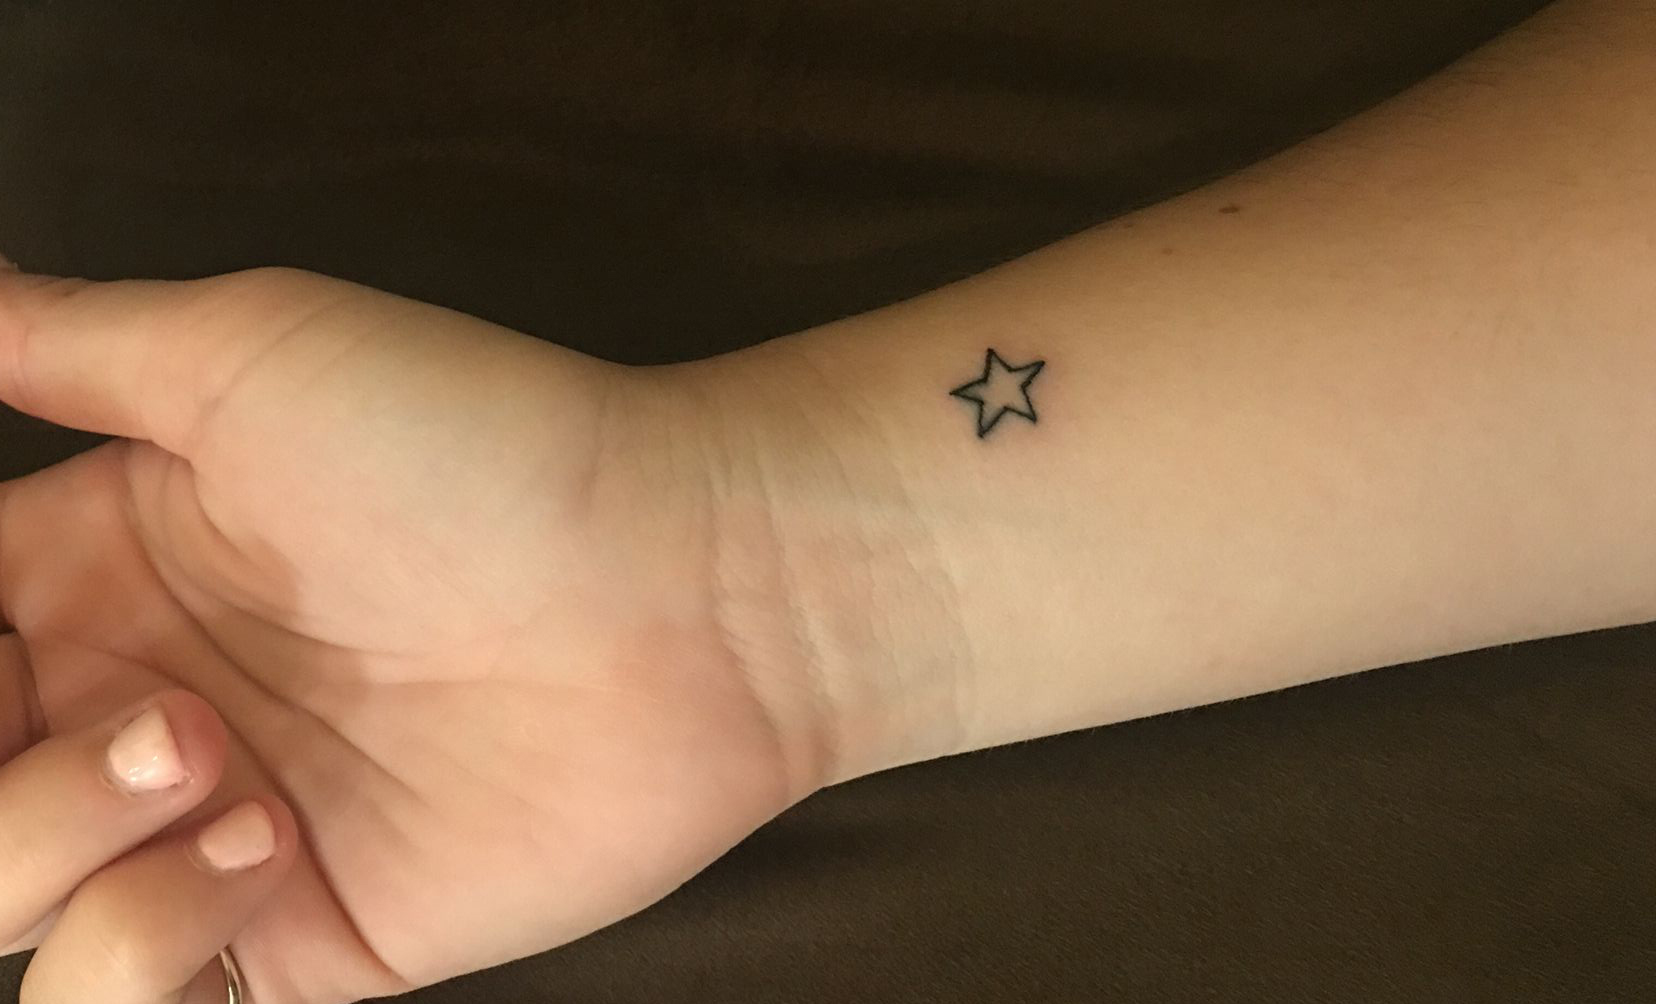 Small Cloud and Star Tattoos - wide 2